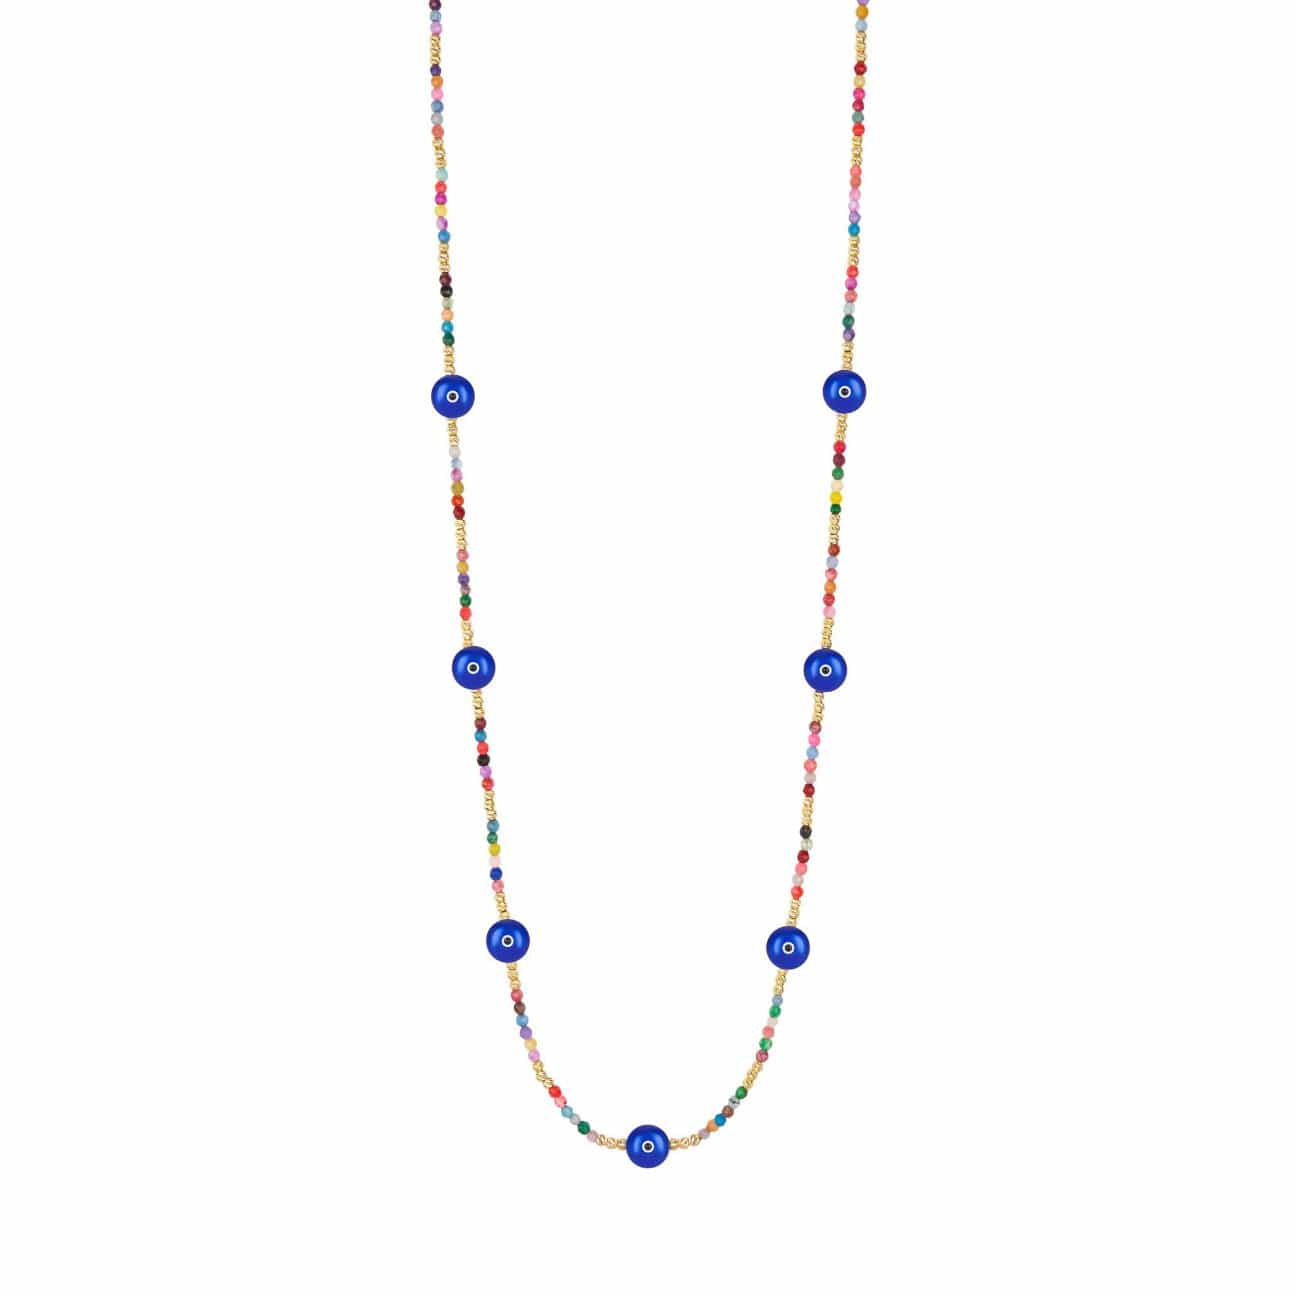 Long Colored Bead Necklace with 7 Majestic Evil Eyes - Navy - Golden Tangerine